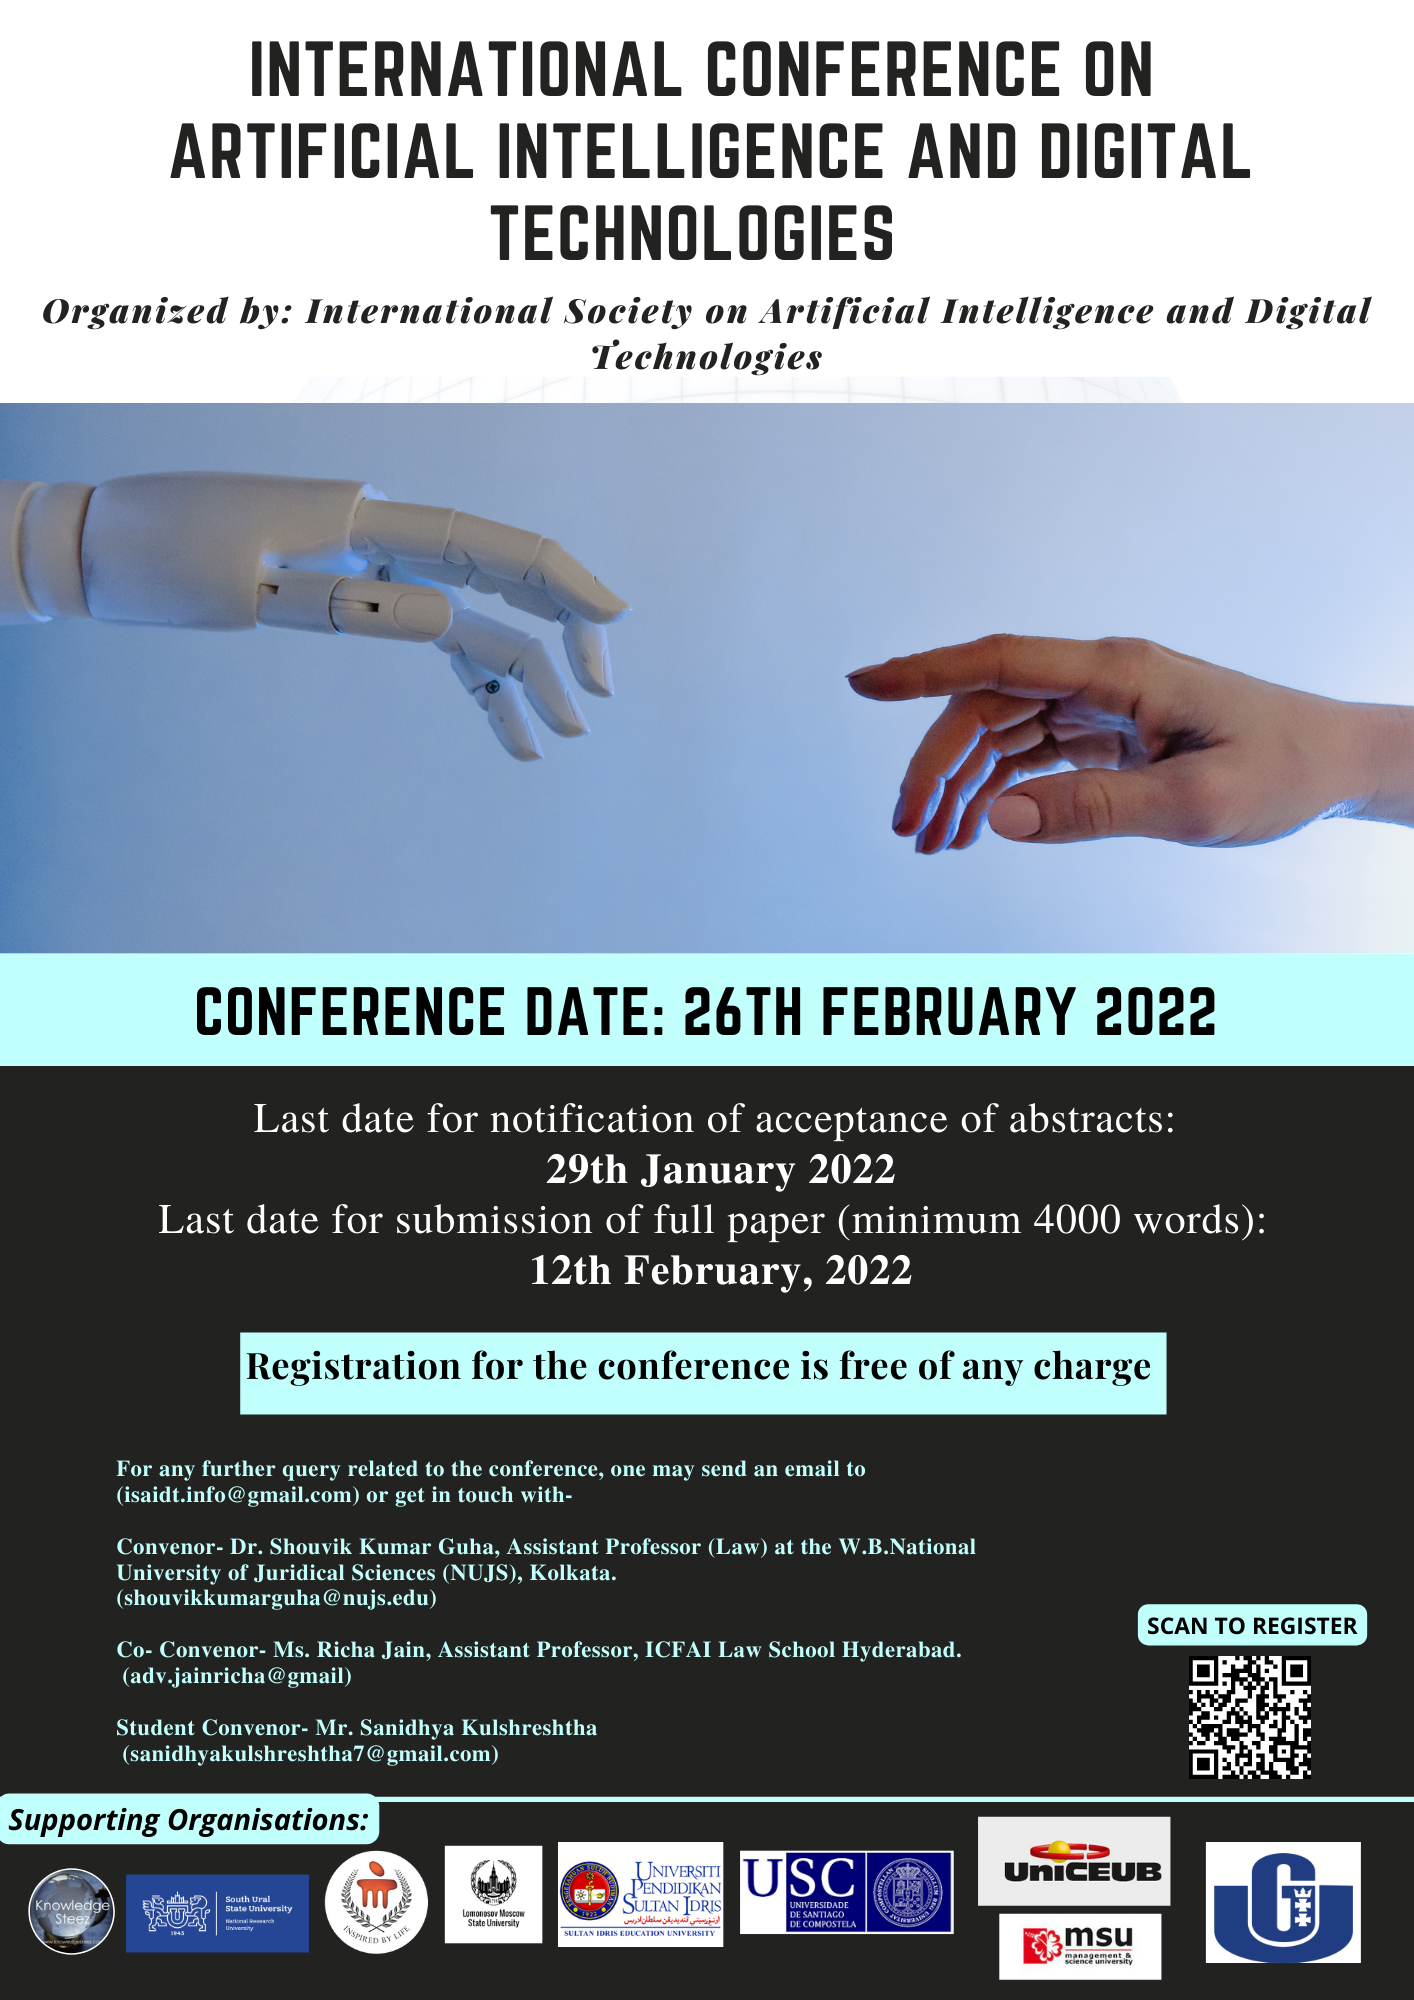 International Conference on Artificial Intelligence and Digital Technologies